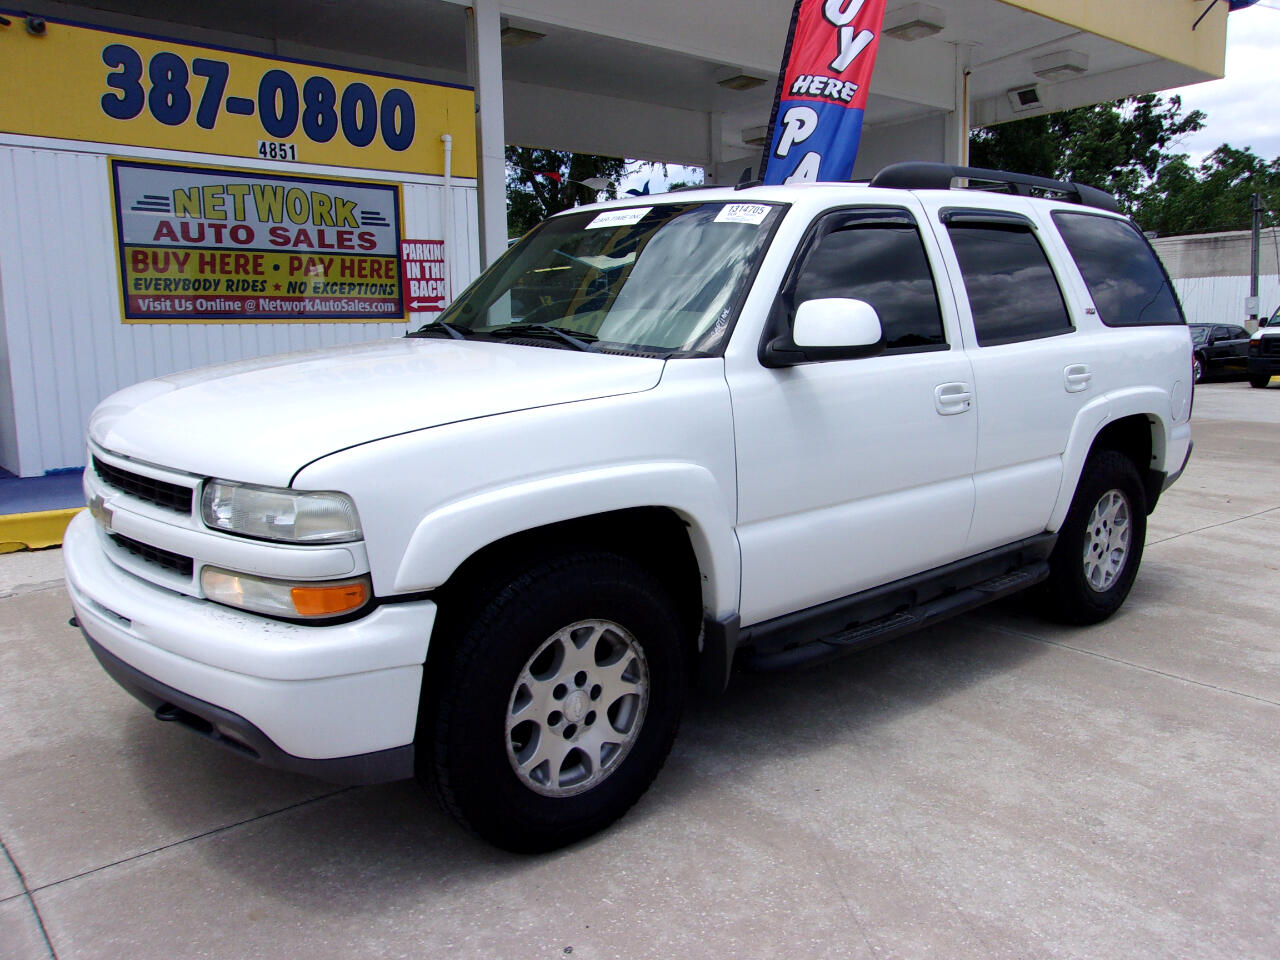 Used 2006 Chevrolet Tahoe 4WD for Sale in Jacksonville FL 32210 Network 